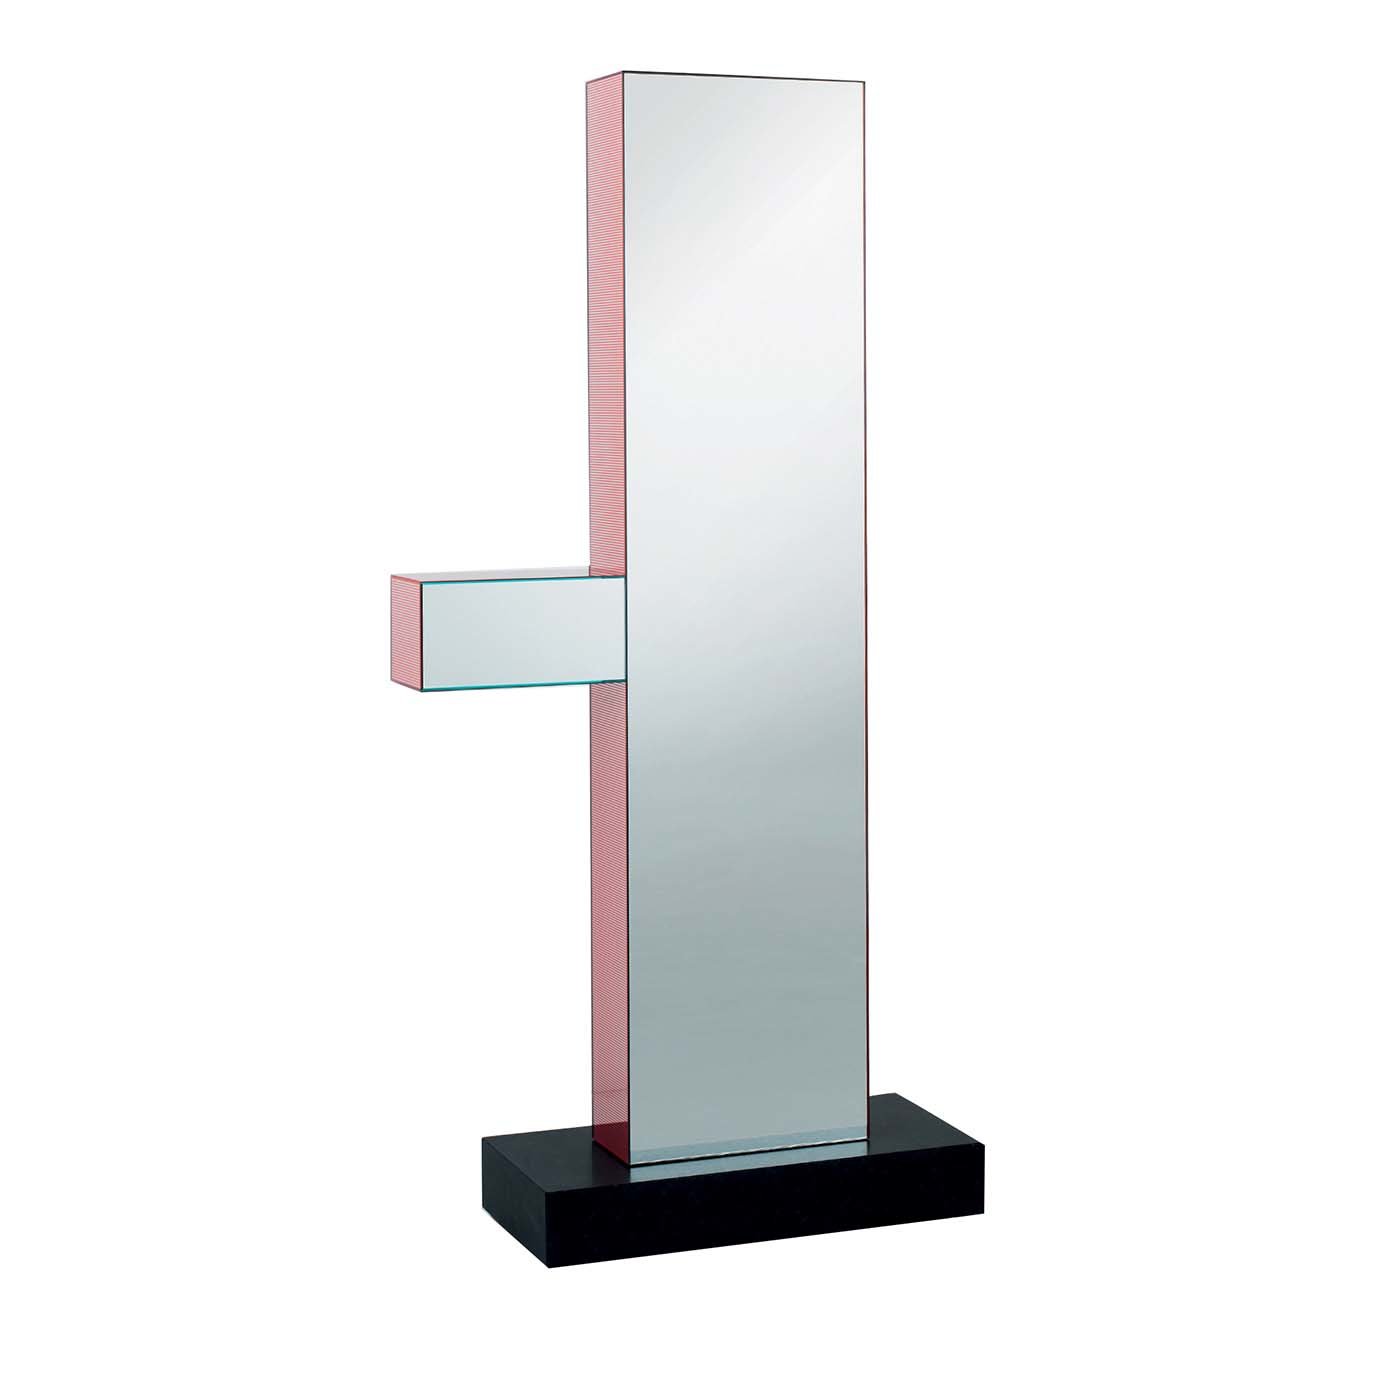 Shibam 1 Totem Mirror by Ettore Sottsass - Main view